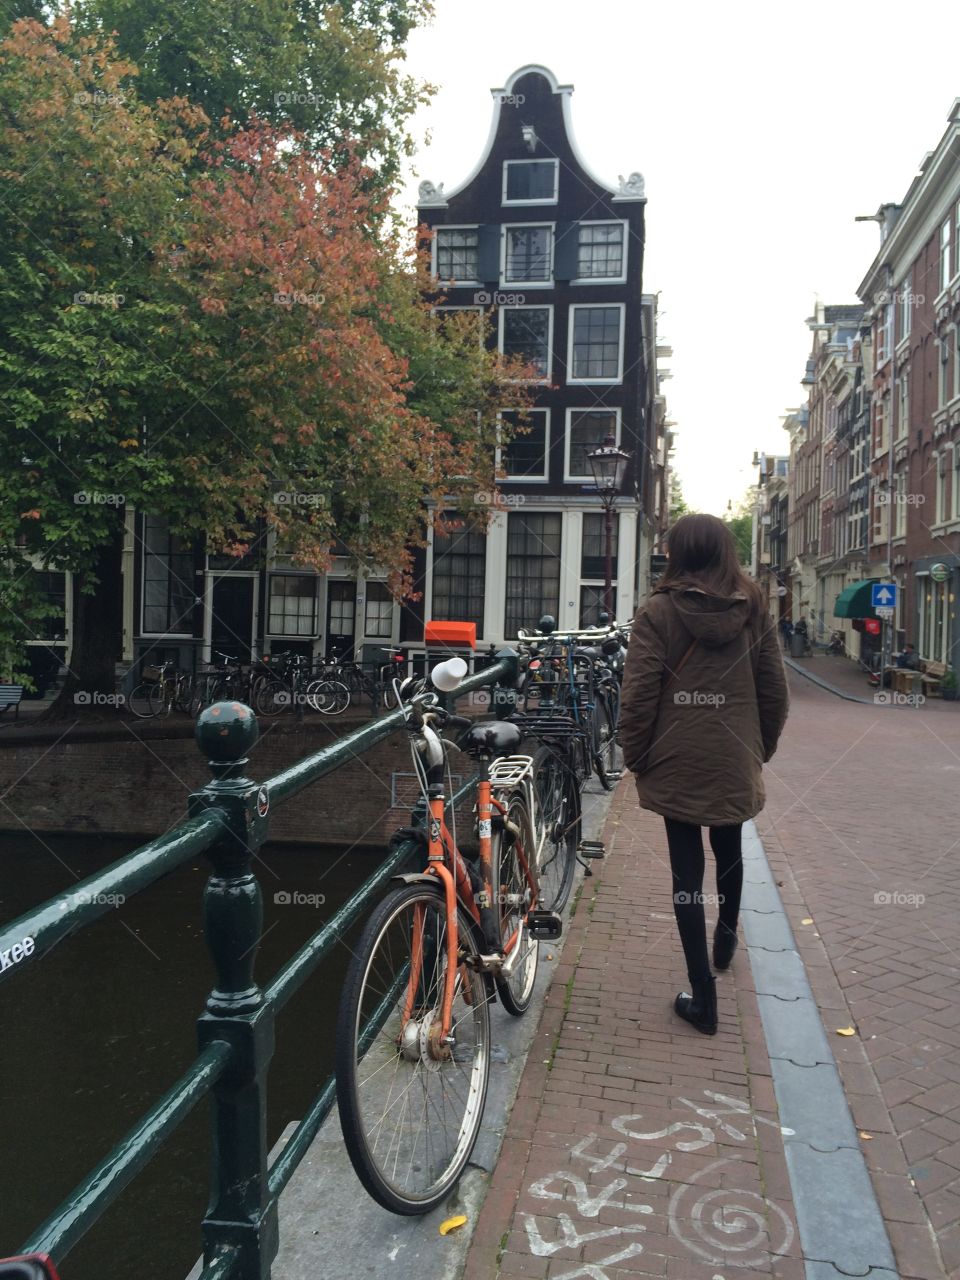 Walking along the canals in Amsterdam 